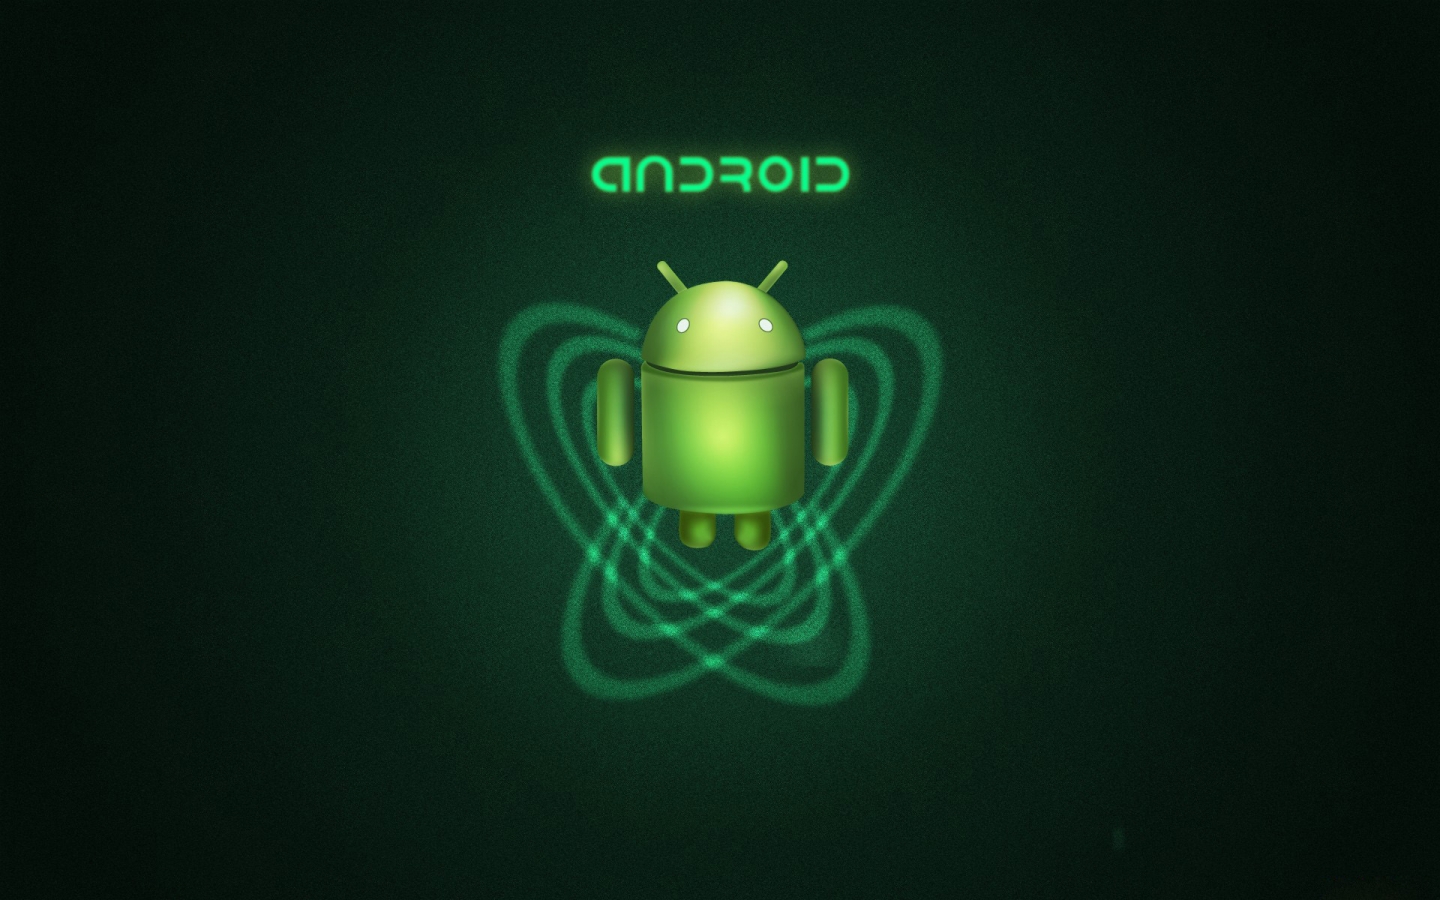 Android Mascot for 1440 x 900 widescreen resolution